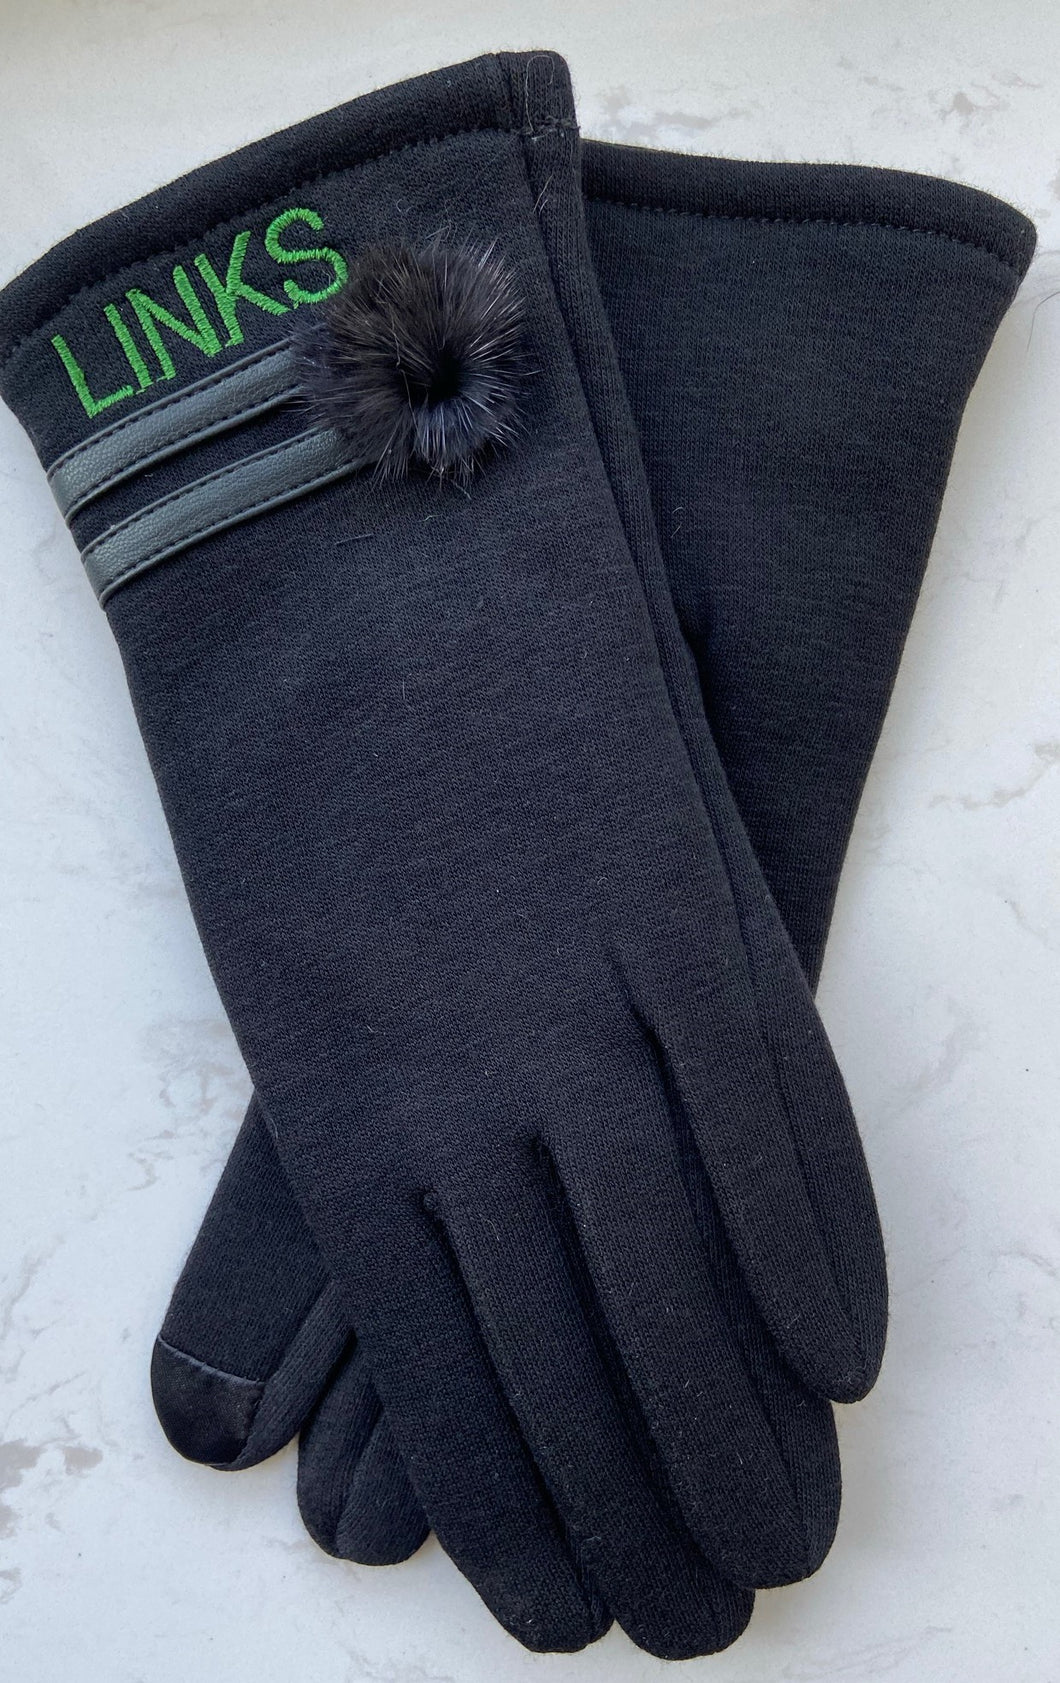 LINKS Cozy Gloves ( One Size)